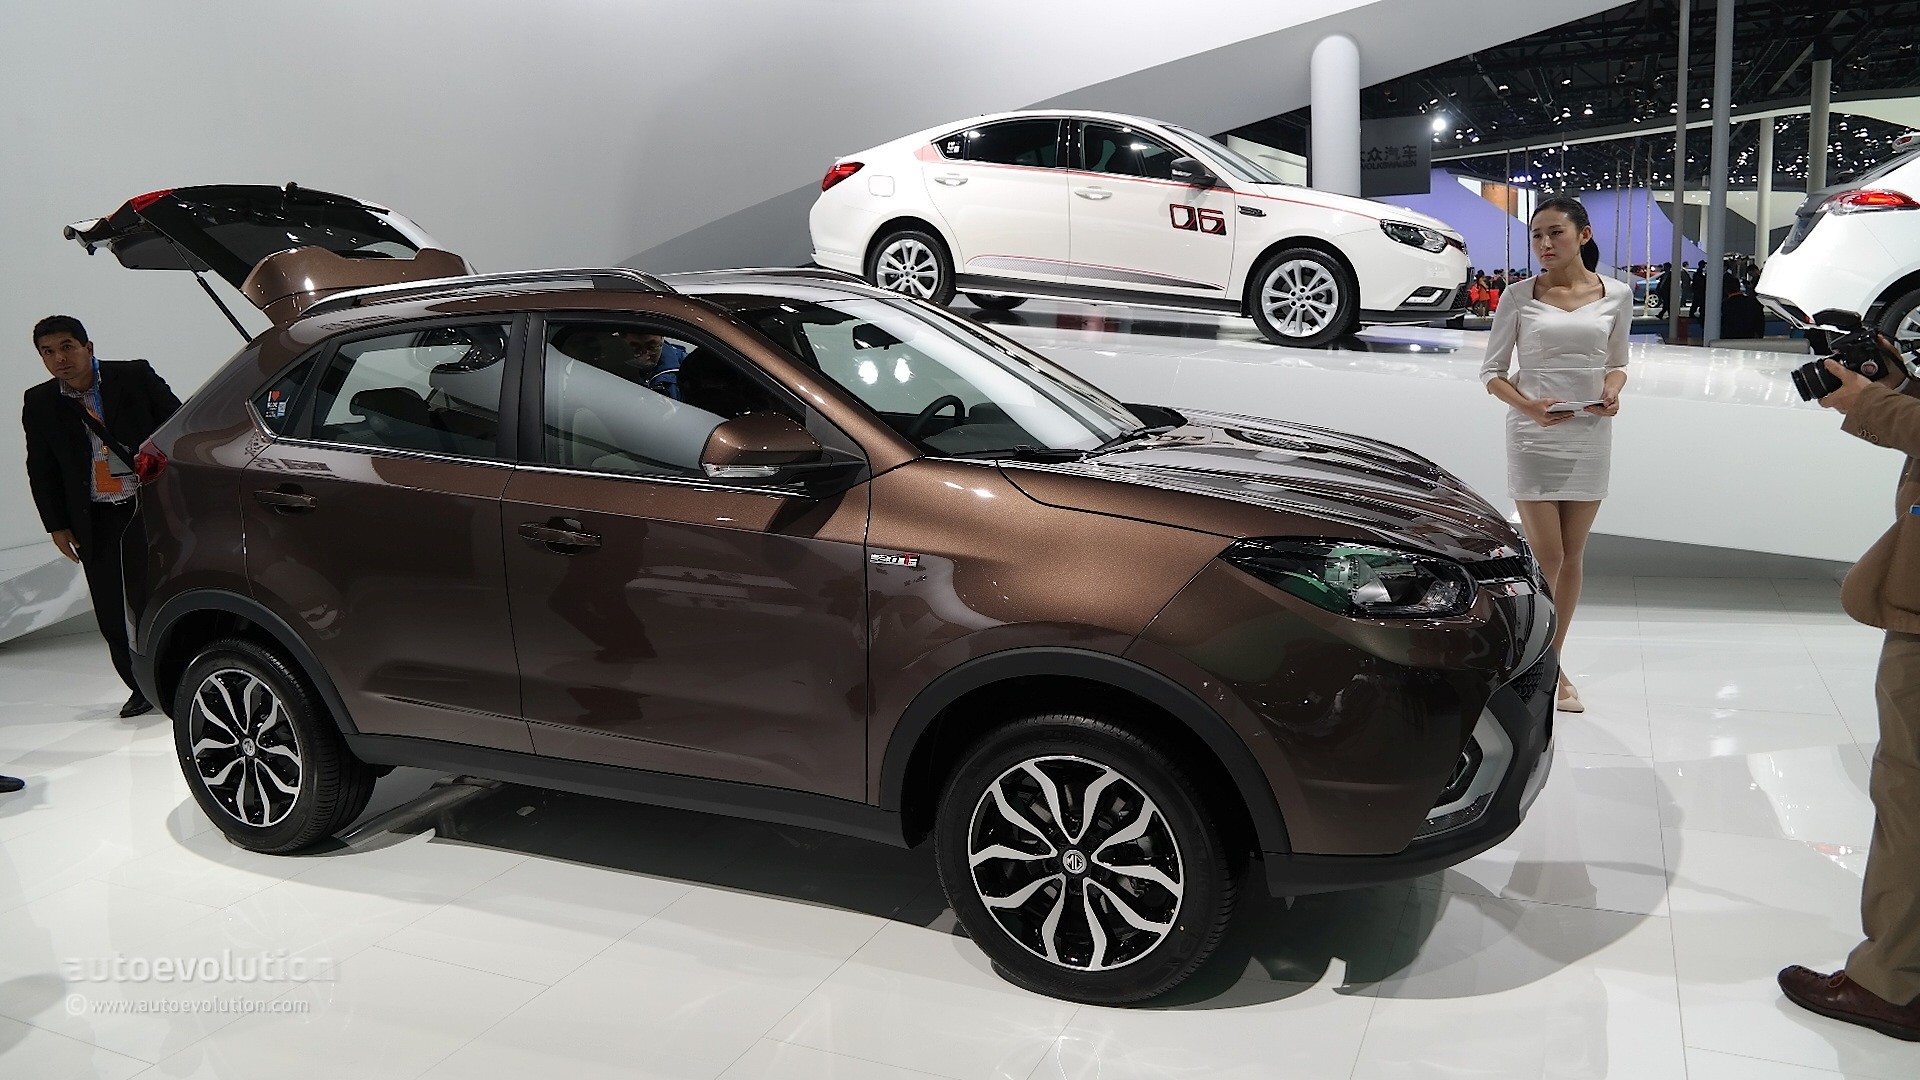 2016 MG GS SUV Priced from £14,995, Undercuts the Nissan Qashqai by £ ...